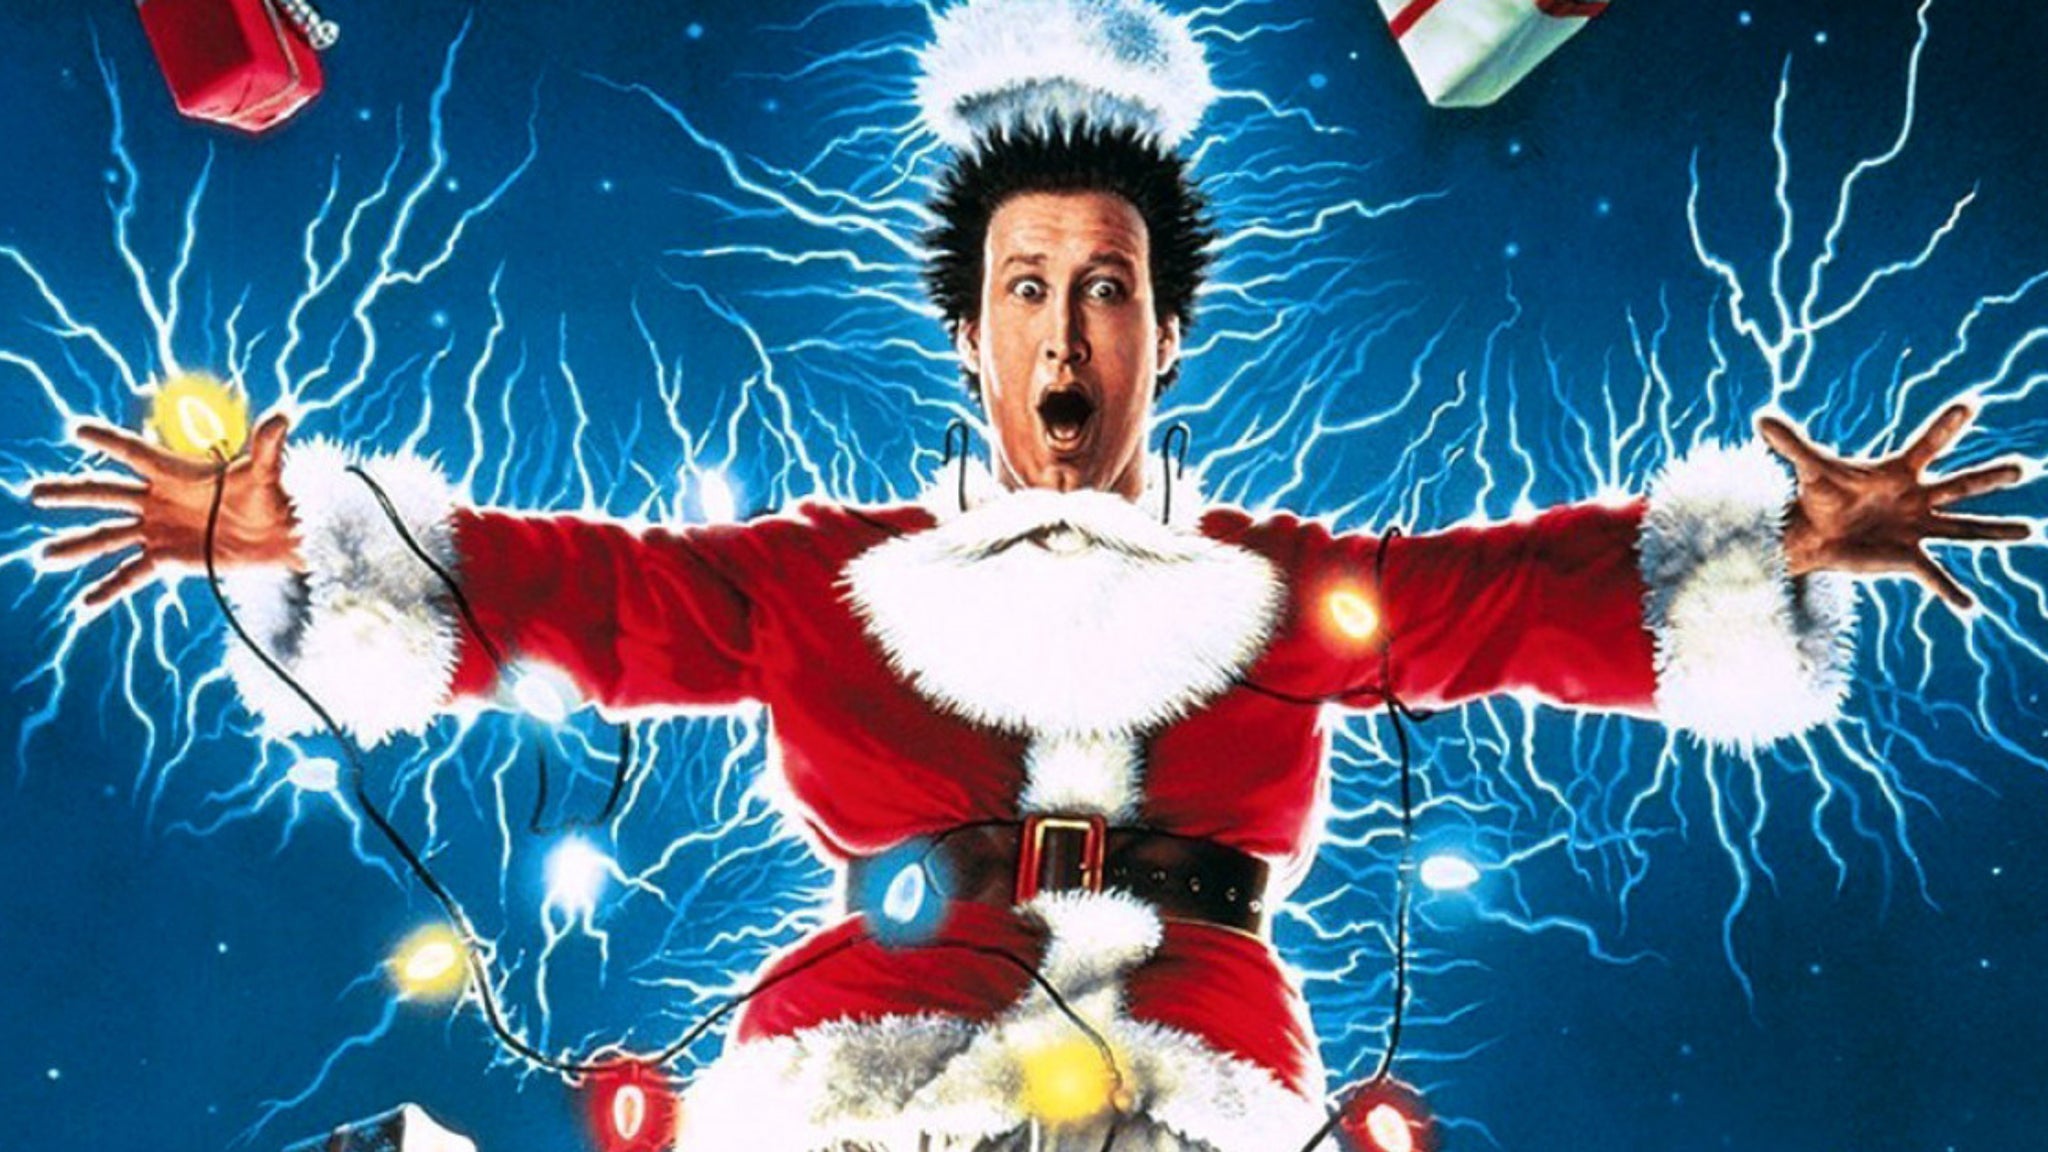 Chevy Chase Live: Christmas Vacation Screening & Q&A pre-sale code